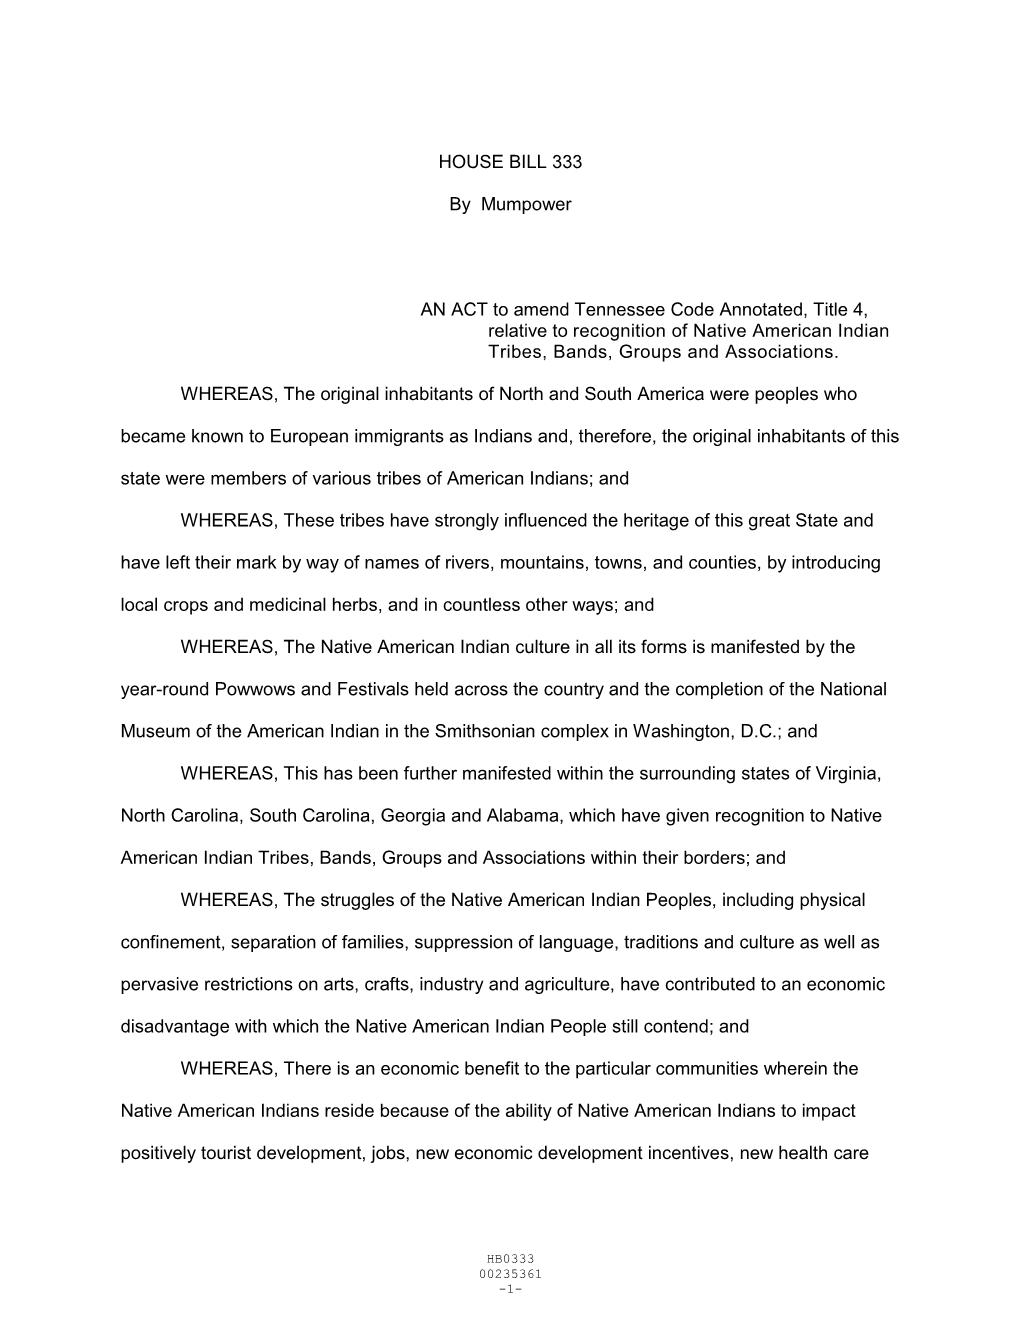 HOUSE BILL 333 by Mumpower an ACT to Amend Tennessee Code